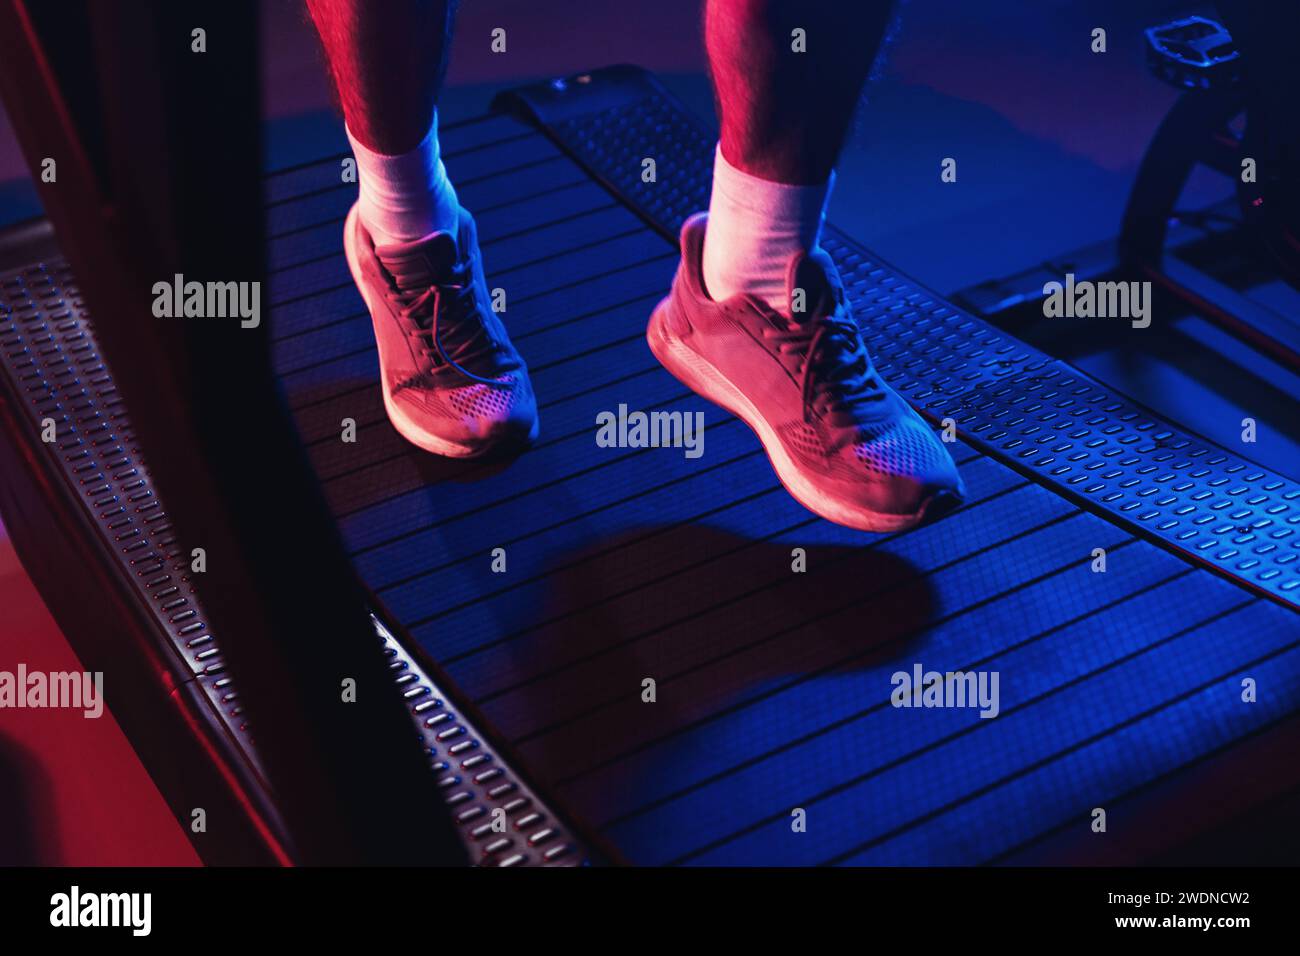 Close up on athletic footwear during a treadmill run, highlighted by dramatic blue and red gym lights amidst a misty ambiance Stock Photo